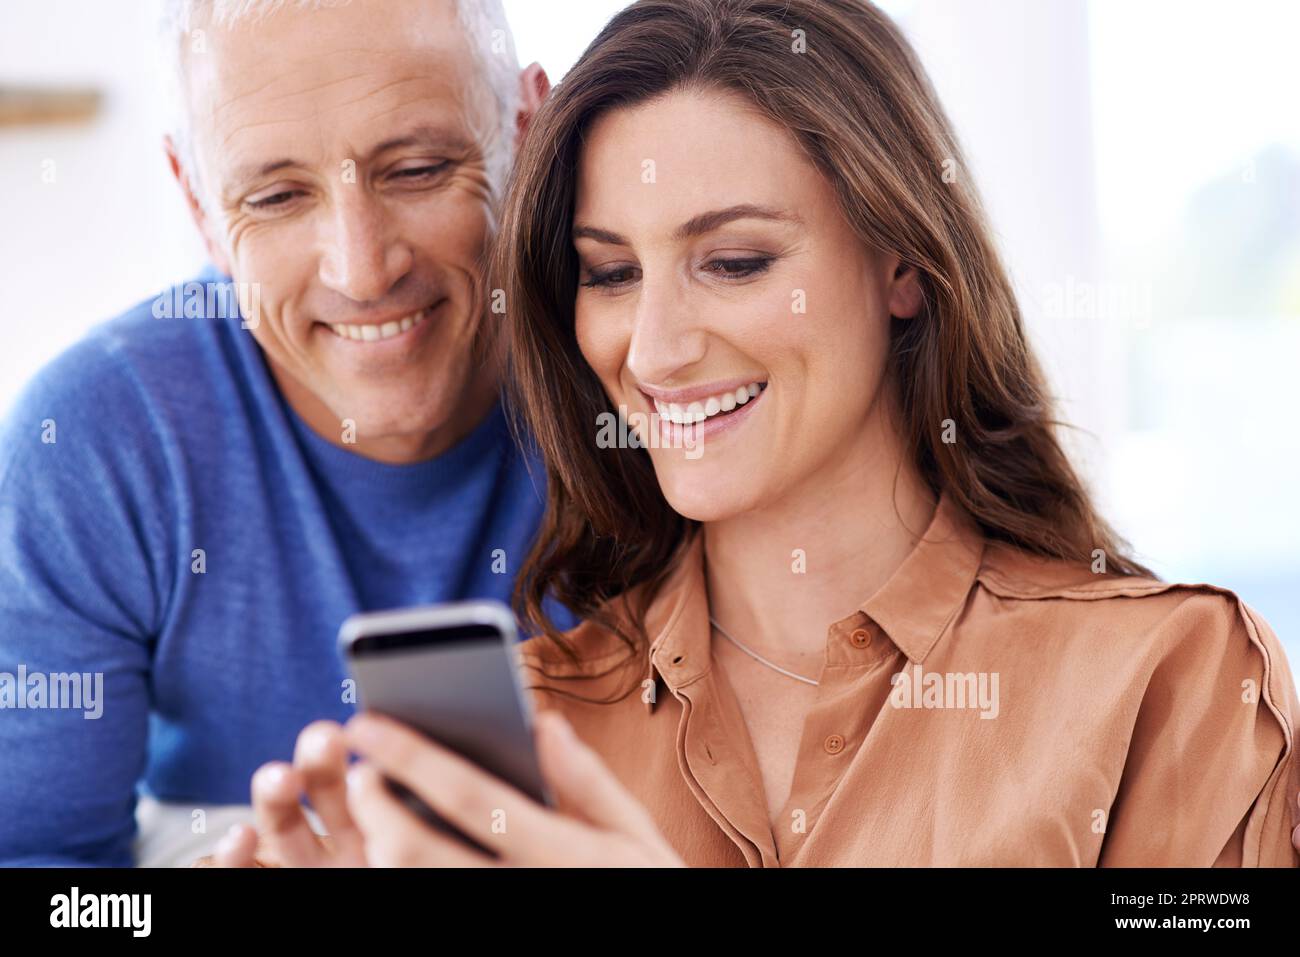 Checking out happy holiday snaps together. a happy mixed age couple smiling at messages on a cellphone. Stock Photo